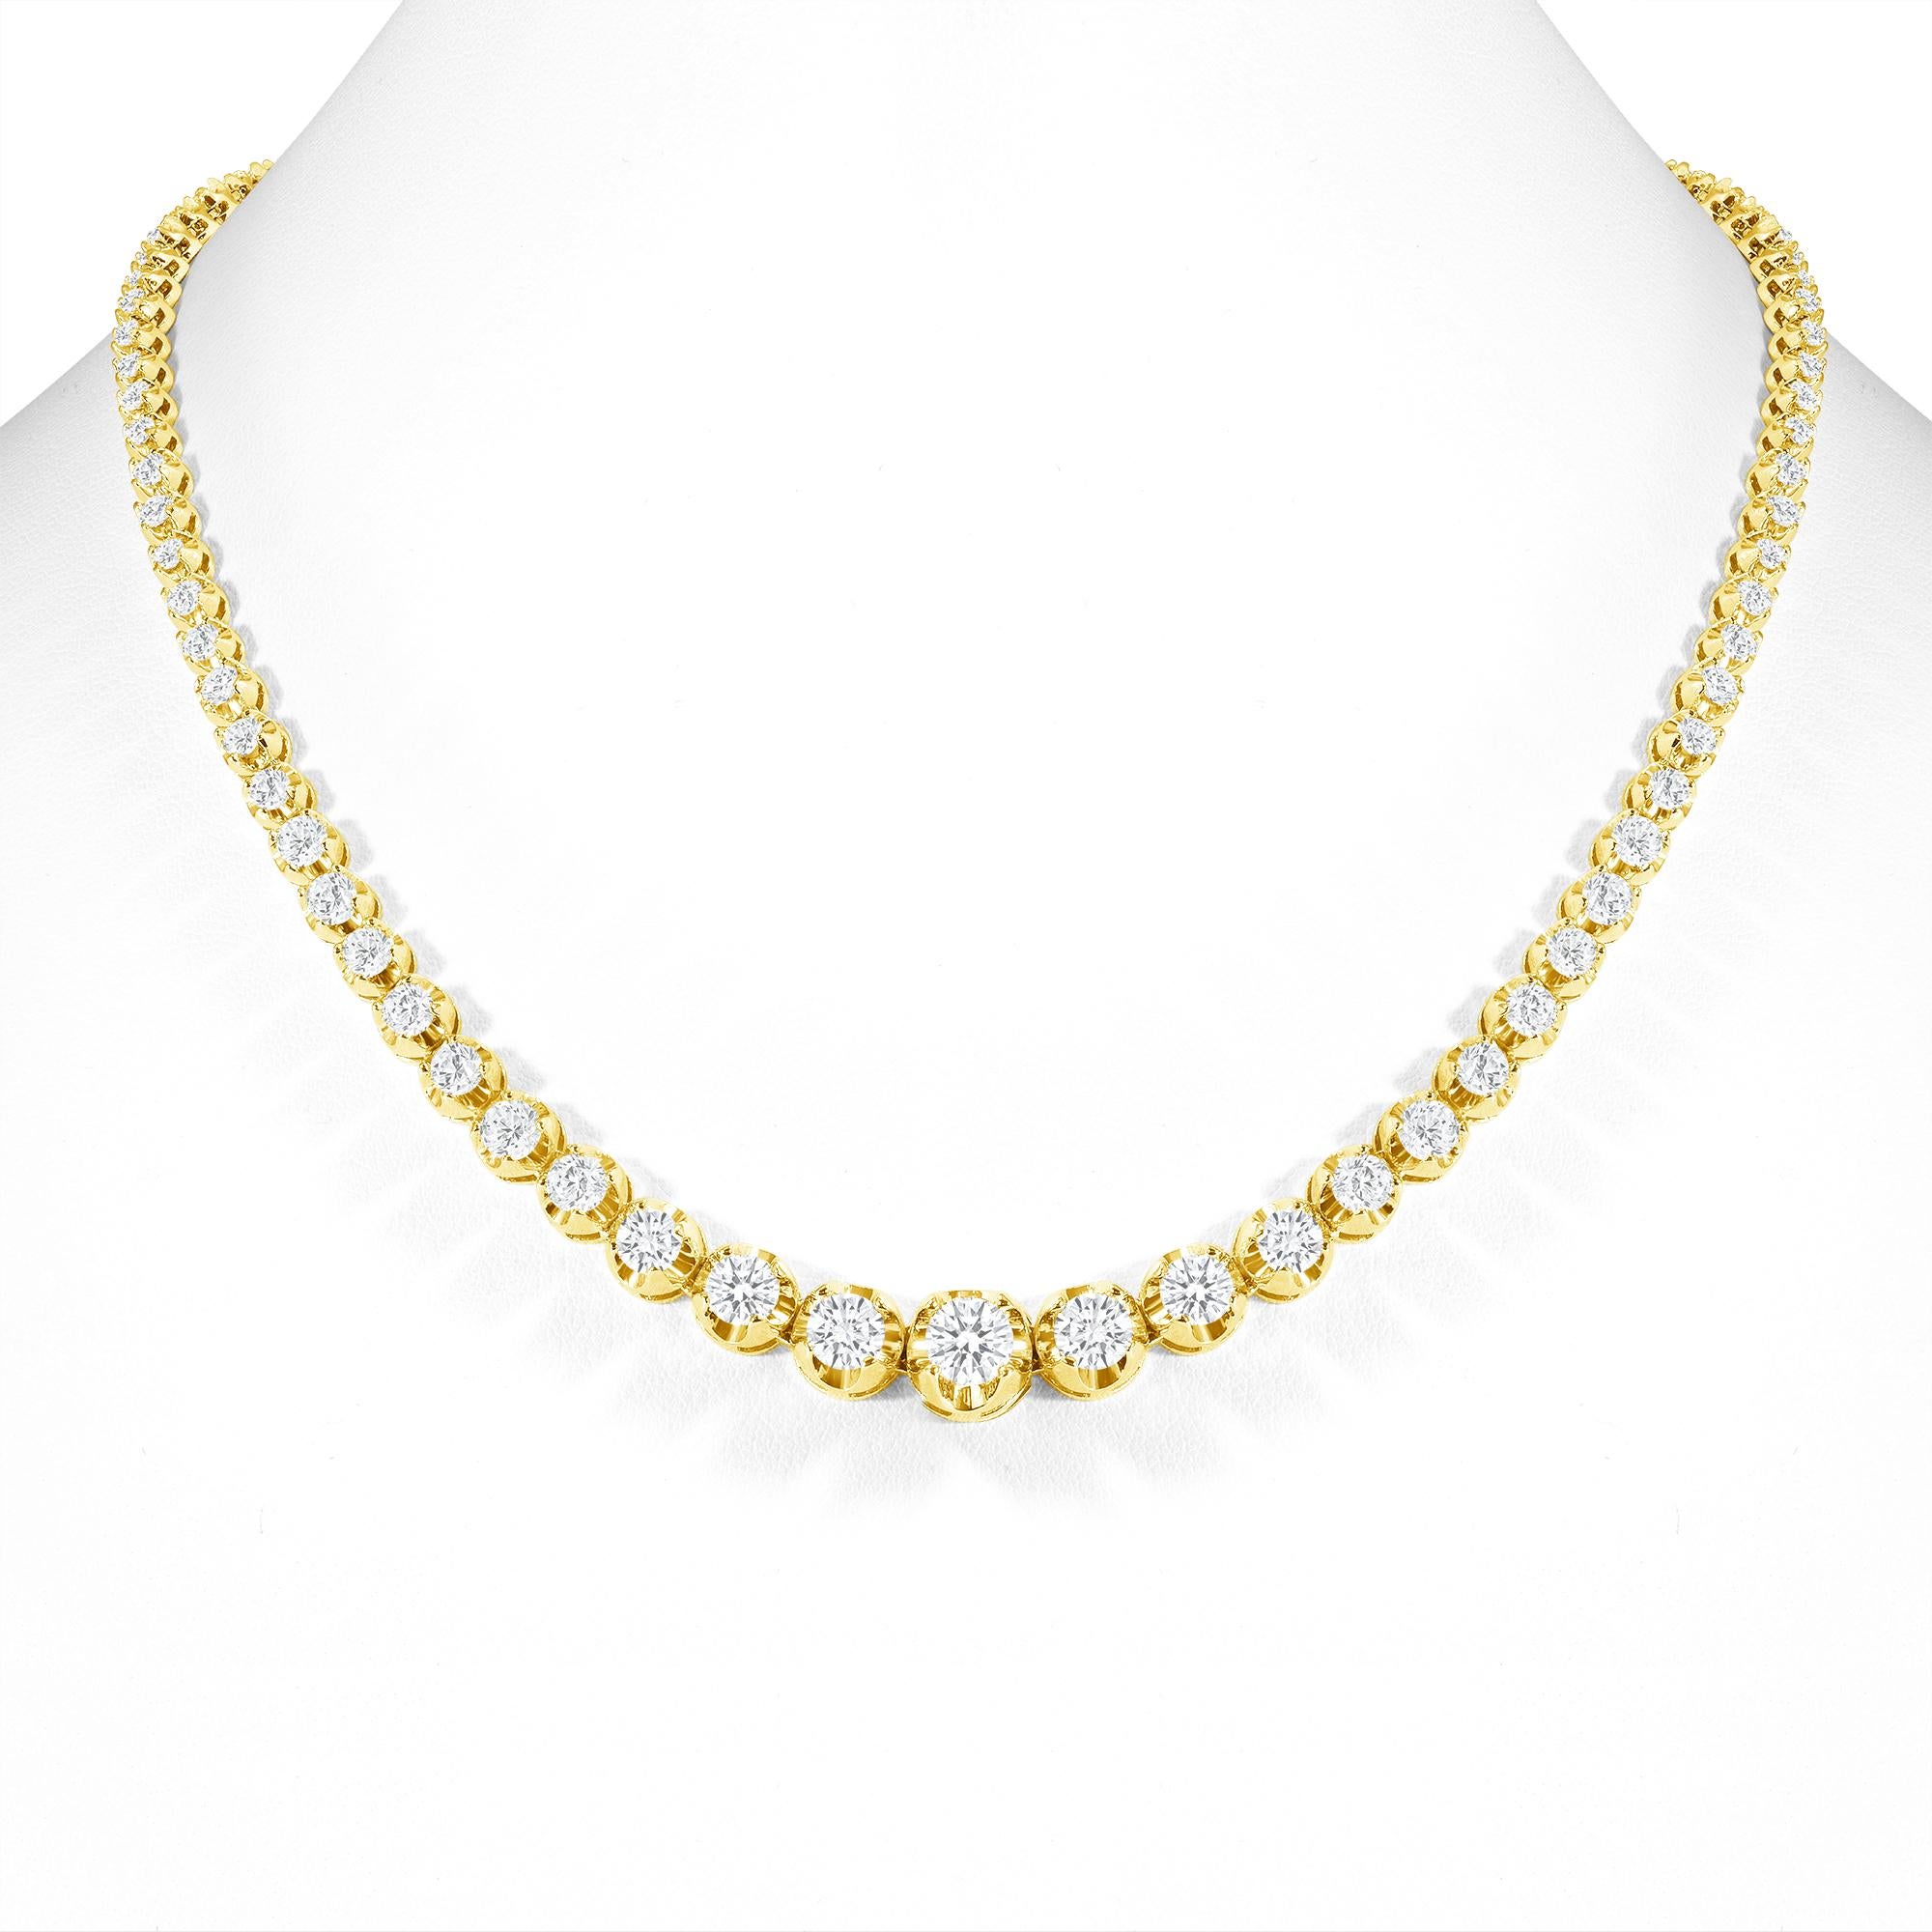 This finely made graduated necklace with beautiful round diamonds sits elegantly on any neck. 

Metal: 14k Gold
Diamond Cut: Round
Total Diamond Approx. Carats:  5ct
Diamond Clarity: VS
Diamond Color: F-G
Size: 16 inches
Color: Yellow Gold
Included